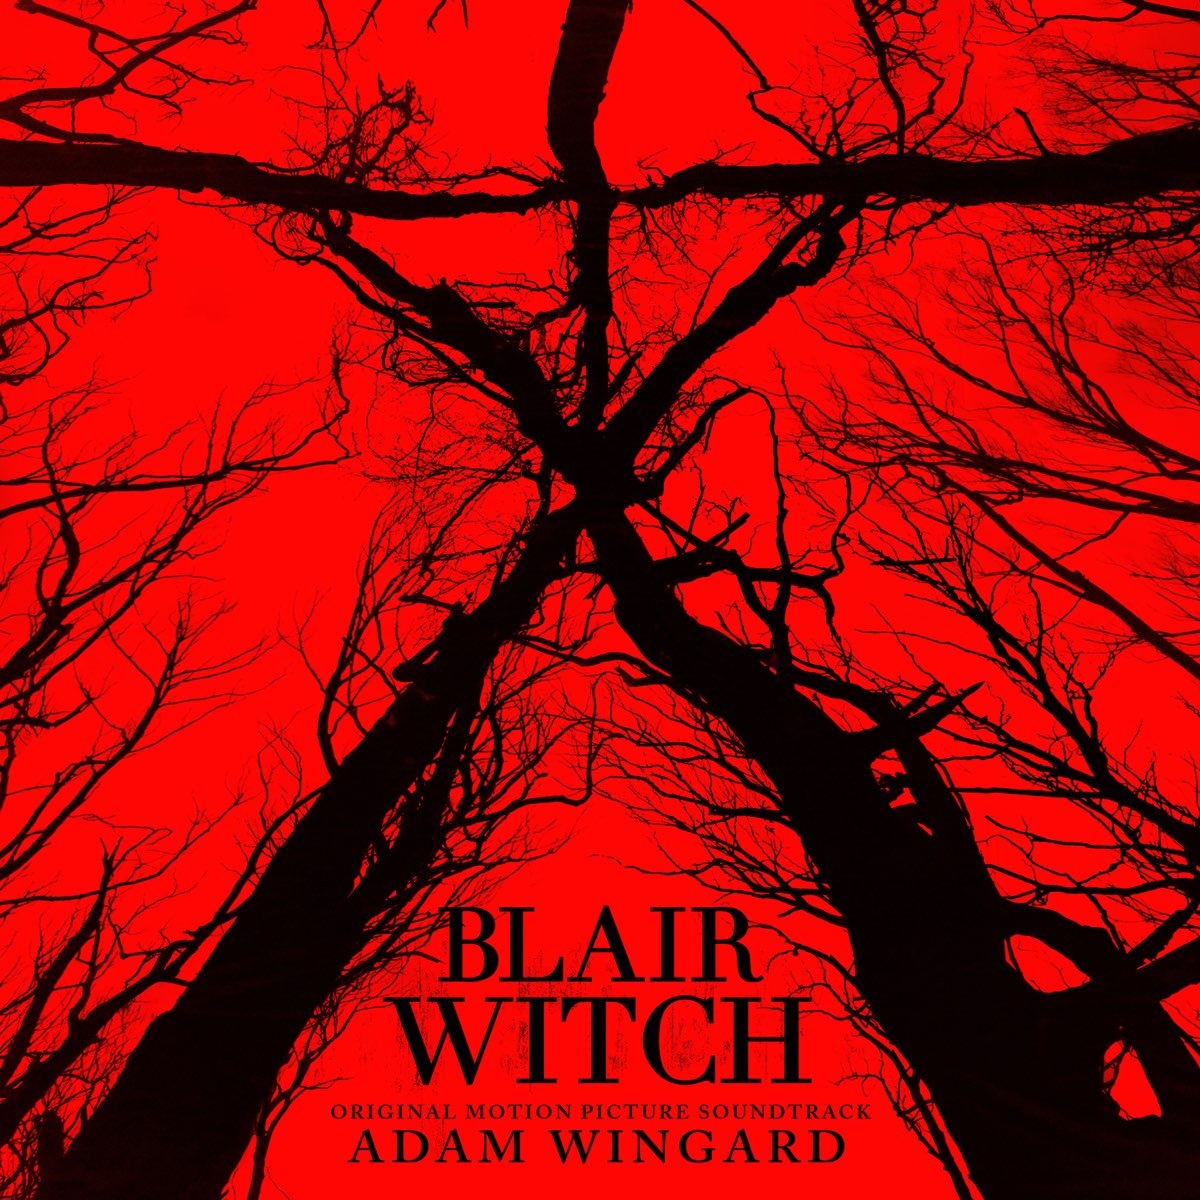 ‎blair Witch Original Motion Picture Soundtrack By Adam Wingard On Apple Music 5201